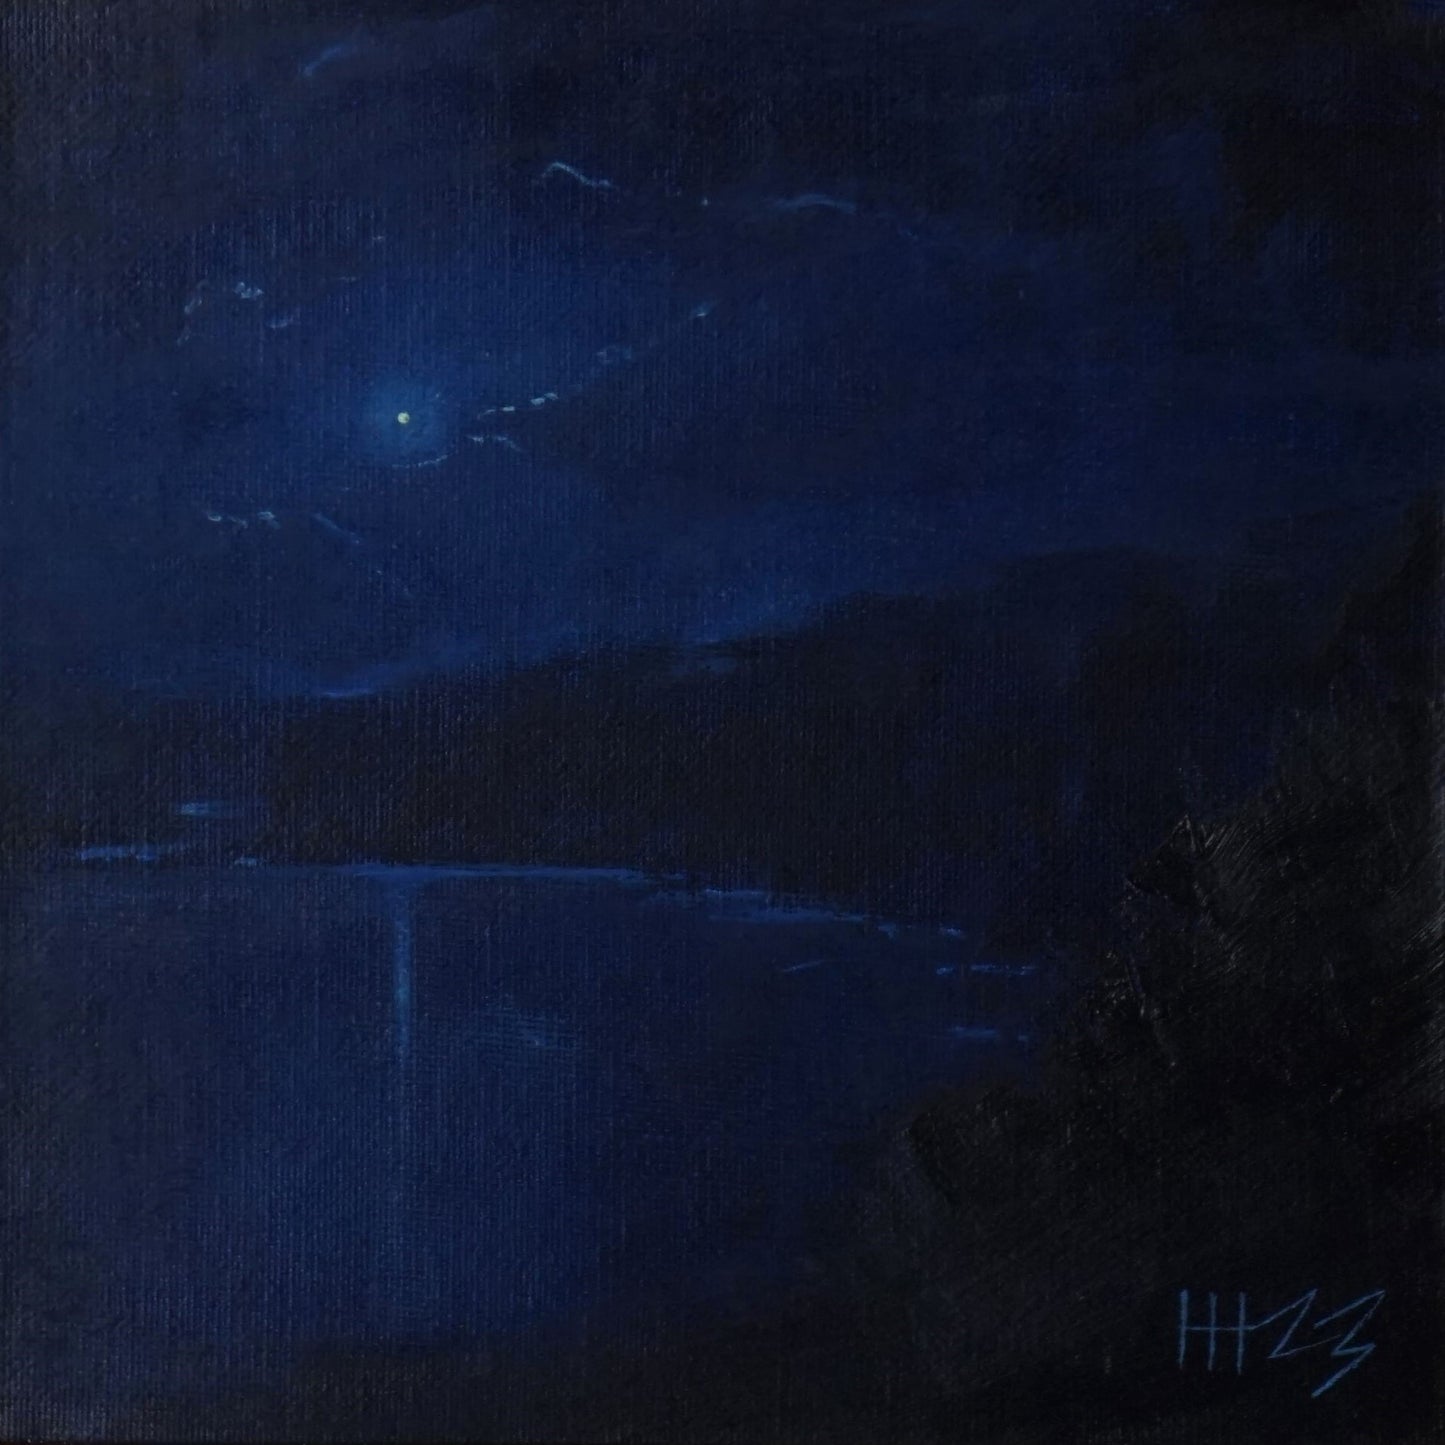 Nocturne observation-20x20cm / Oil painting on canvas panel